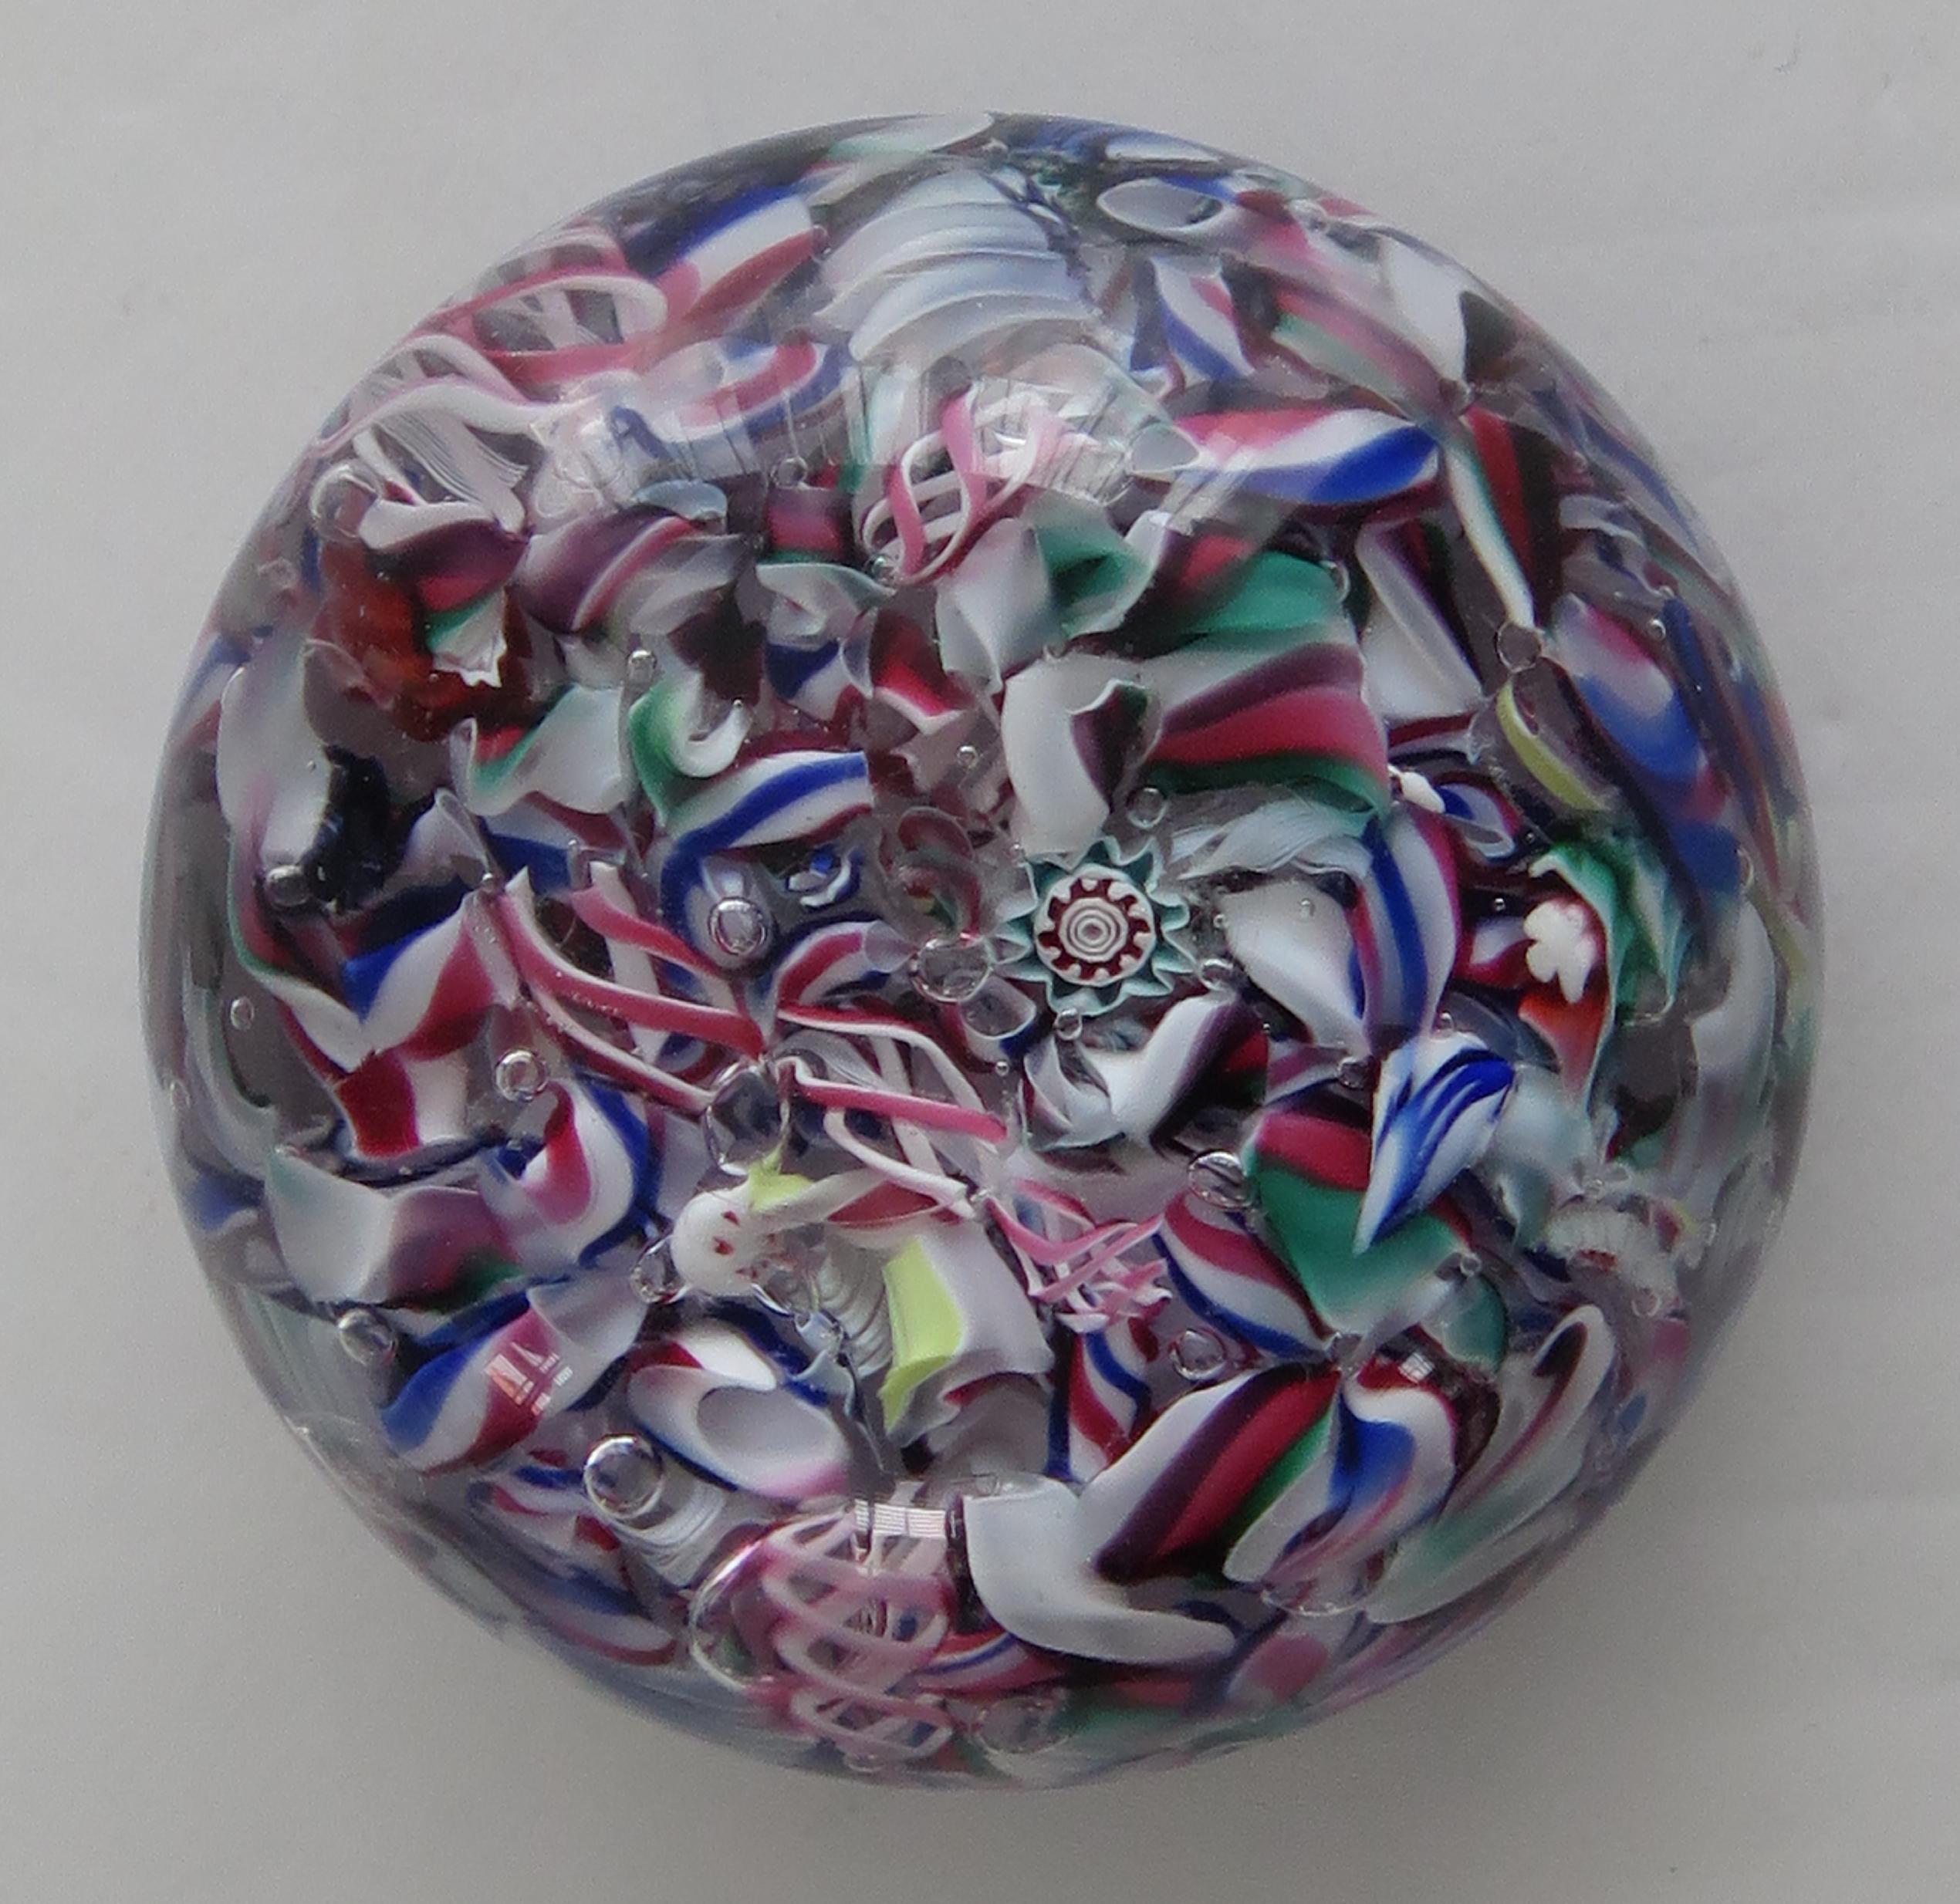 Antique Scrambled Glass Paperweight New England Glass Company, American 1852 In Good Condition For Sale In Lincoln, Lincolnshire